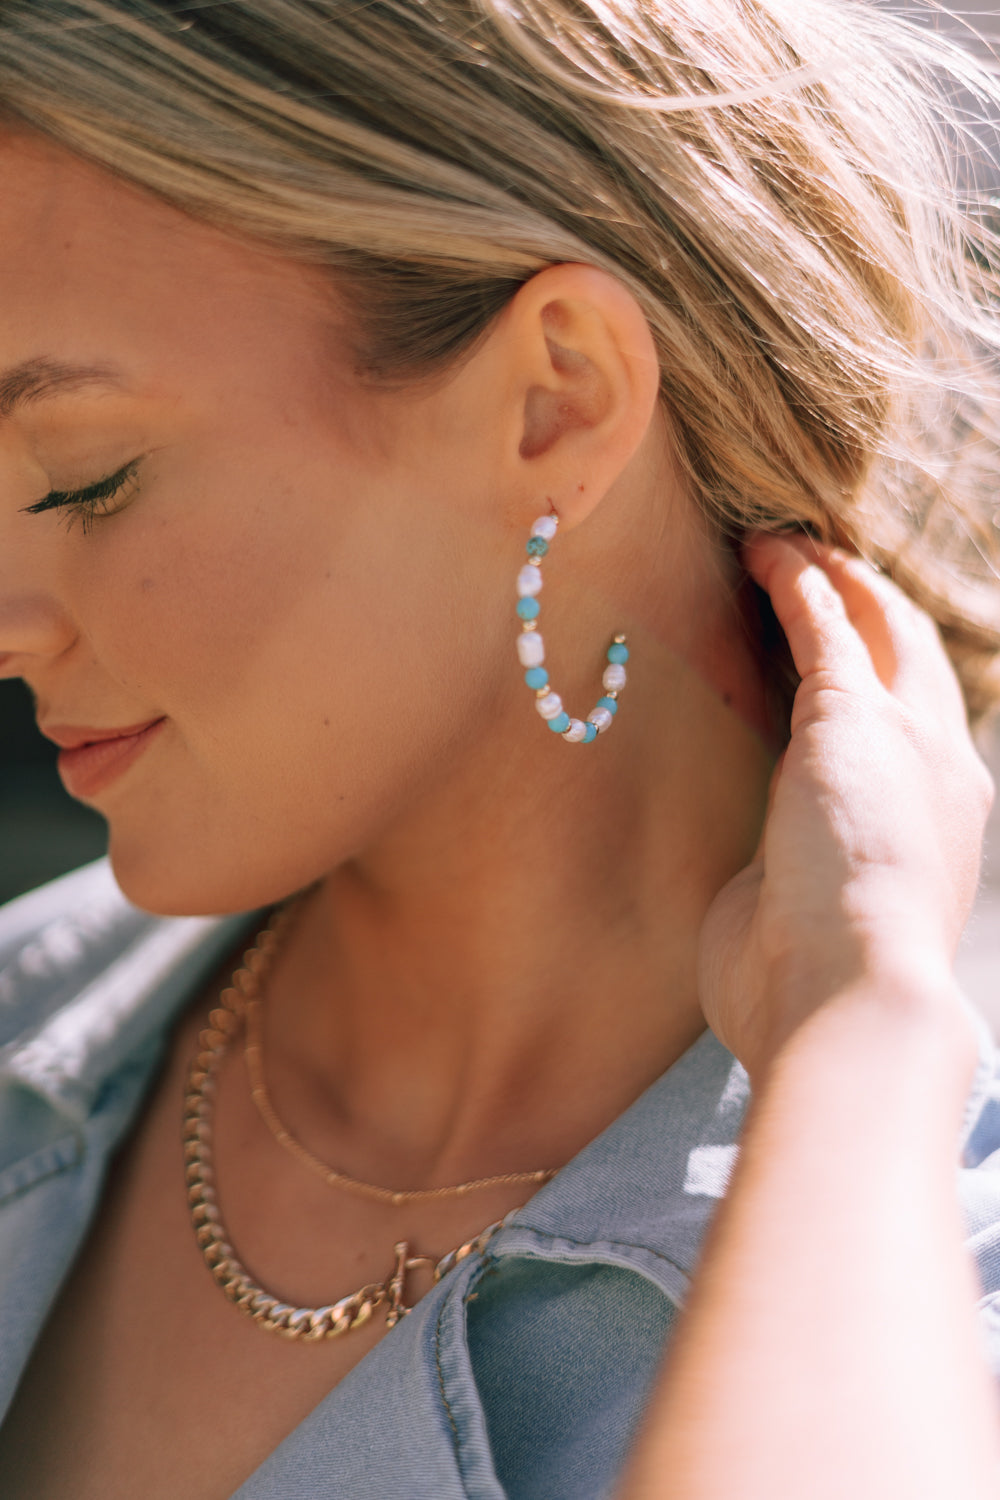 Side view of female model wearing the Avianna Turquoise & Pearl Hoop Earring which features large, open hoops with gold, turquoise and pearl beads